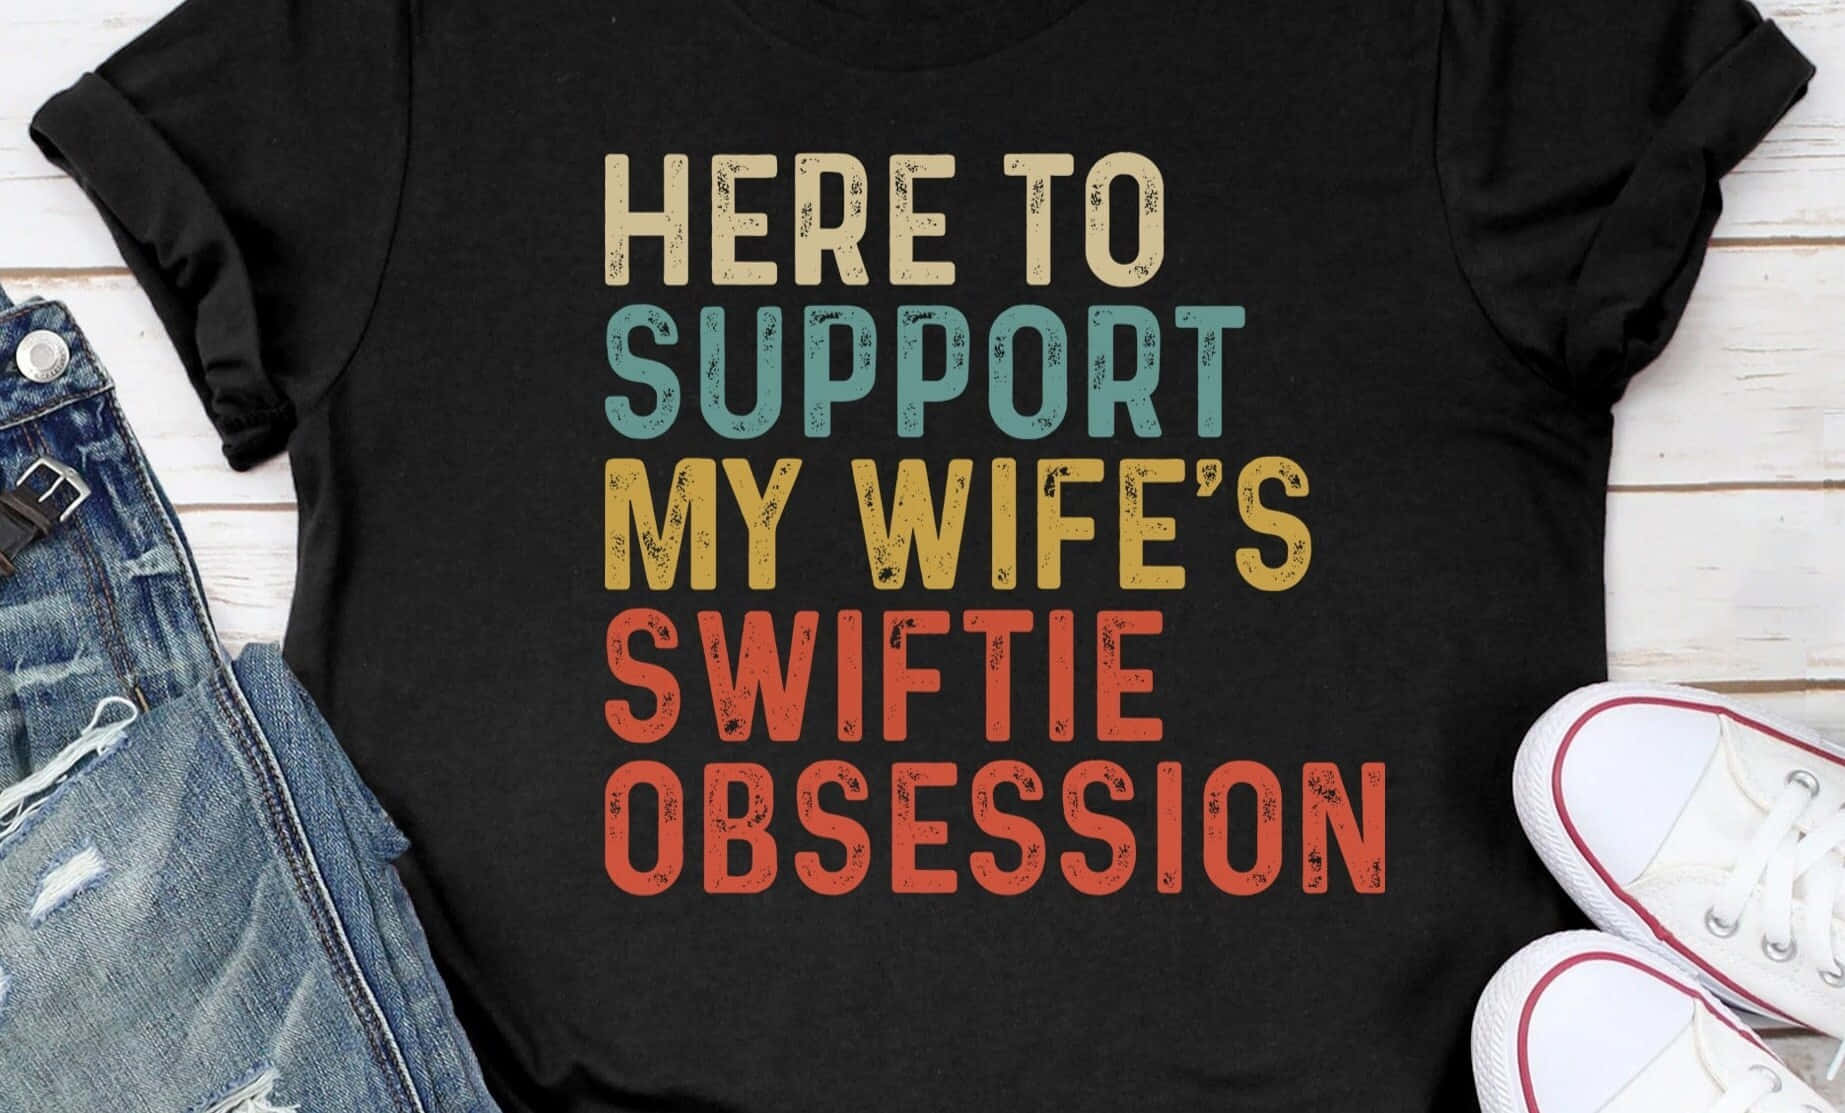 Supportive Swiftie Obsession Shirt Wallpaper